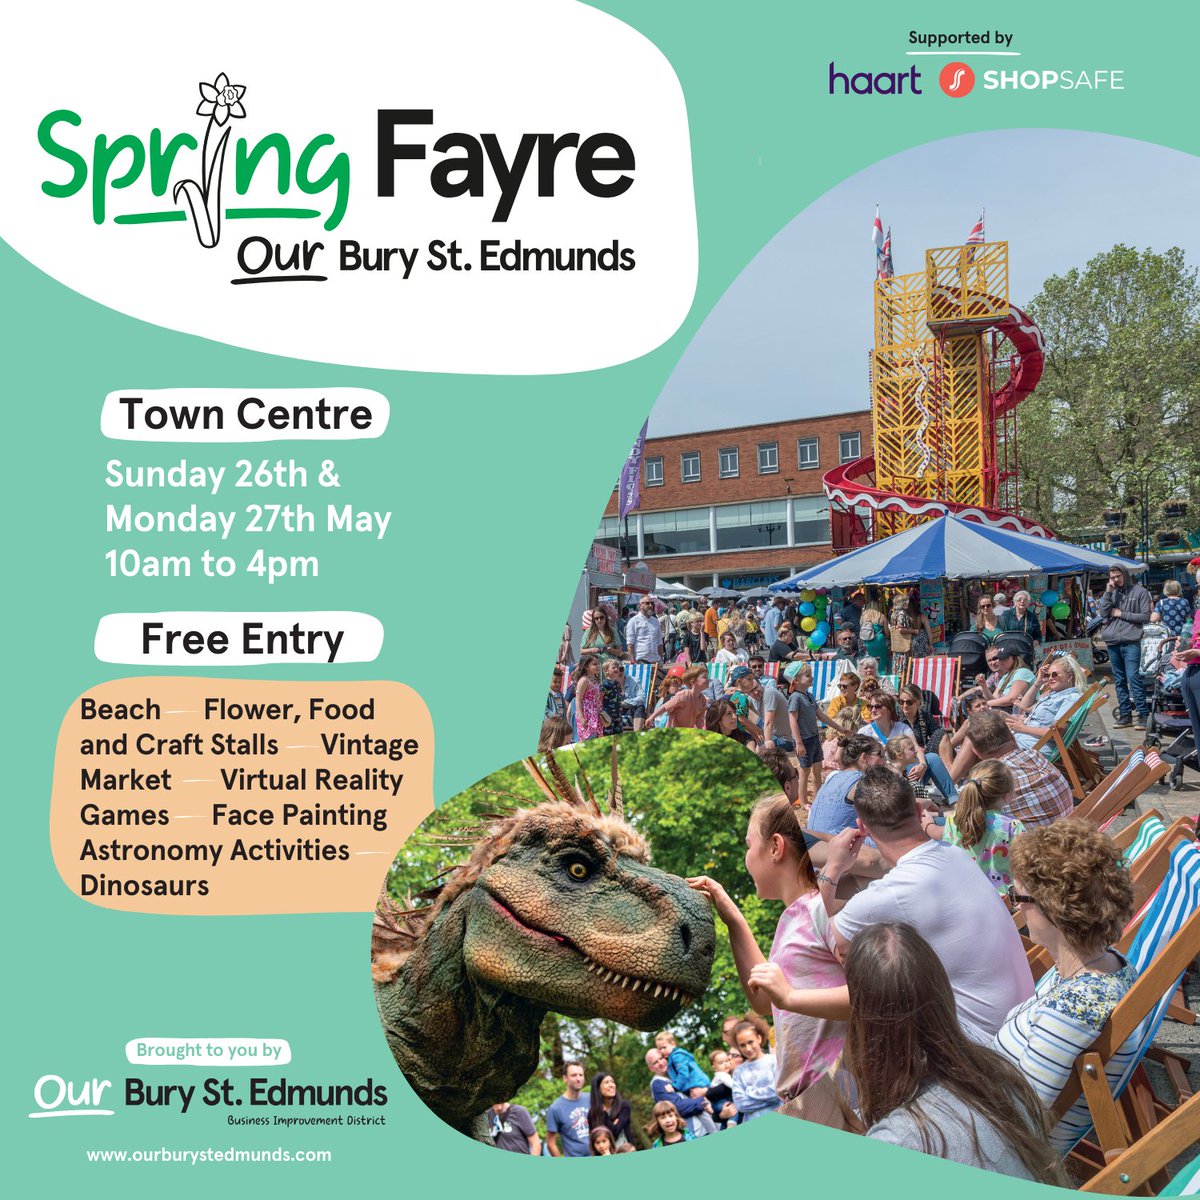 Join us on Sunday May 26th and Monday May 27th, from 10:00am to 4:00 pm at our Spring Fayre event. 🌸Get ready for fun in the sun at the Urban Beach and encounter big dinosaurs along with adorable baby dinos in Charter Square at the arc Shopping Centre. bit.ly/3TVF7a9